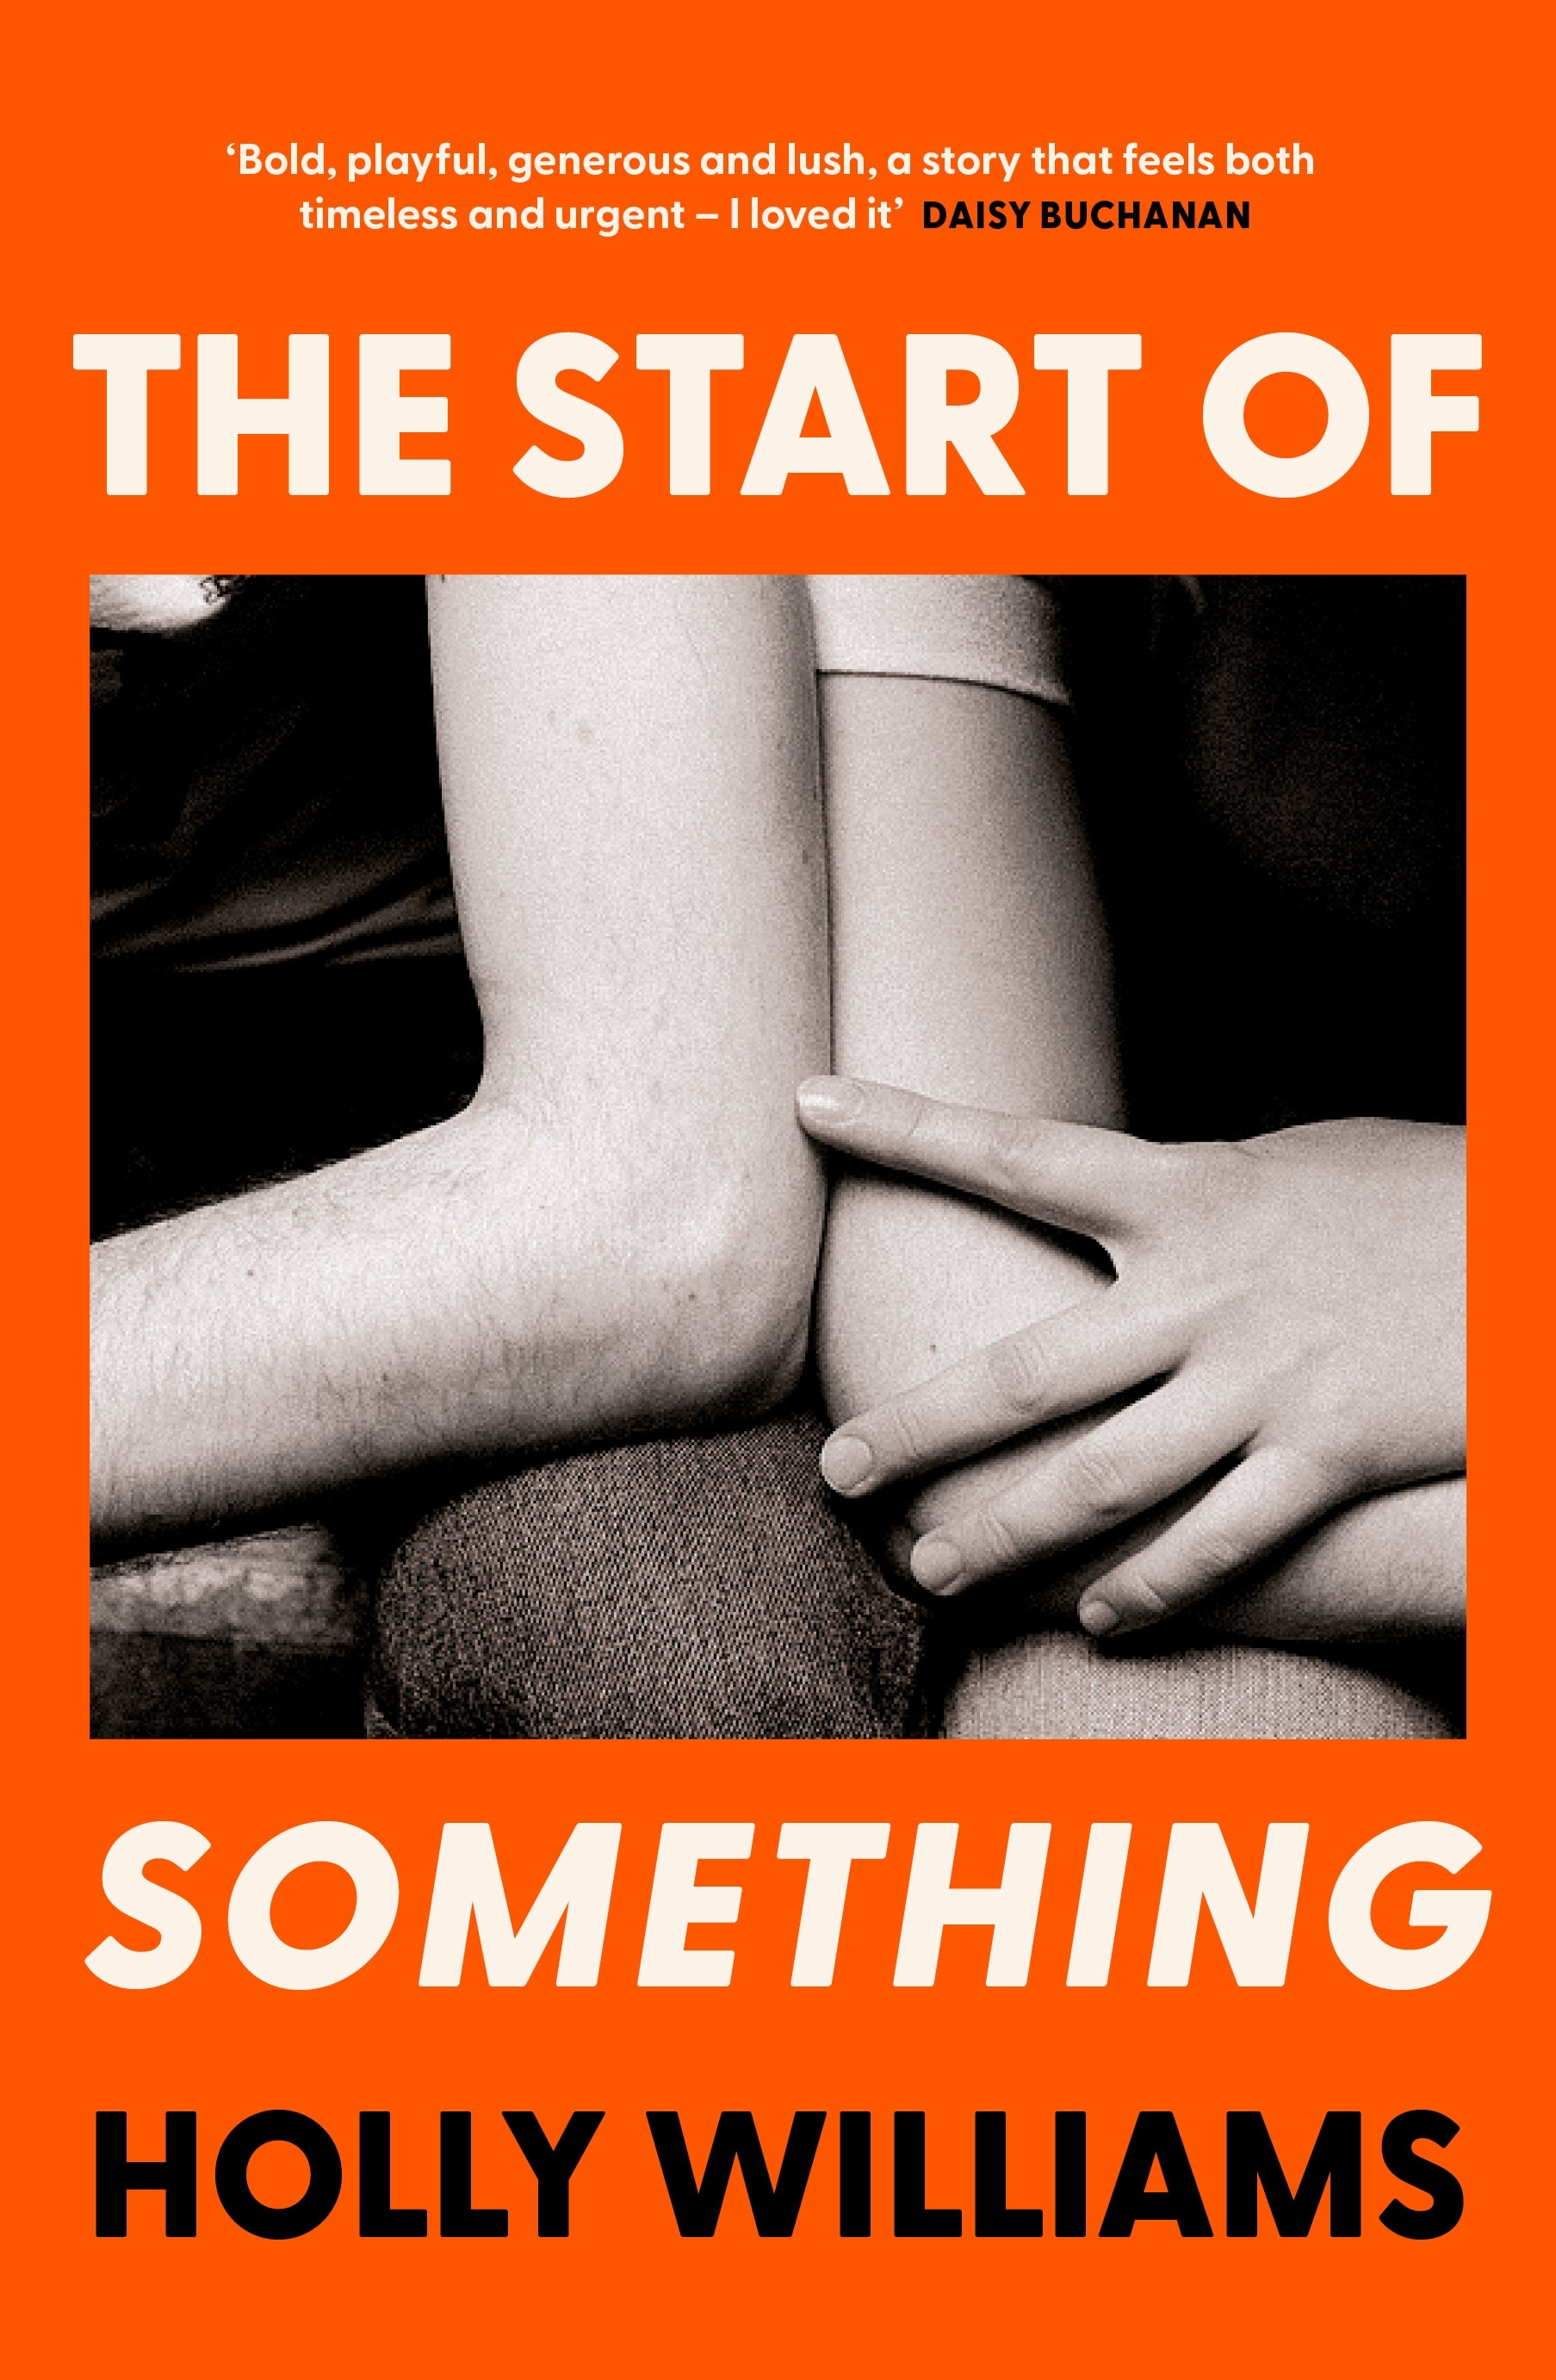 Holly Williams’s new book ‘The Start of Something’